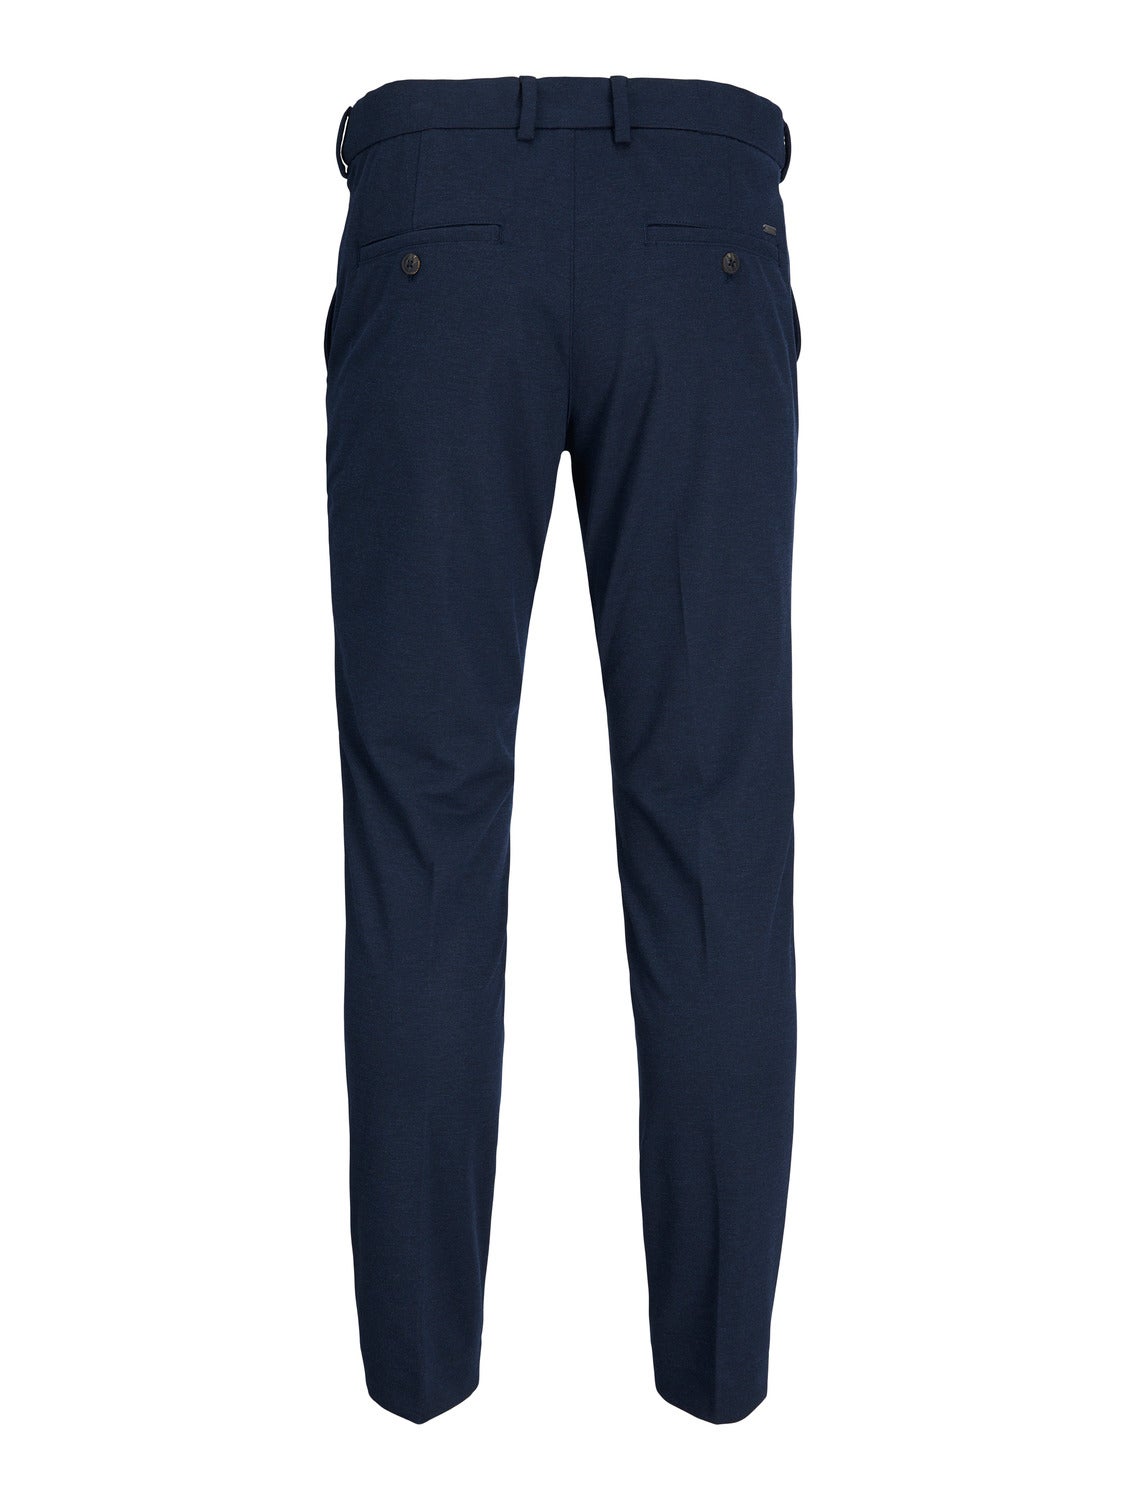 Navy Blue Chinos - Shop for Navy Blue Chinos Online | Myntra